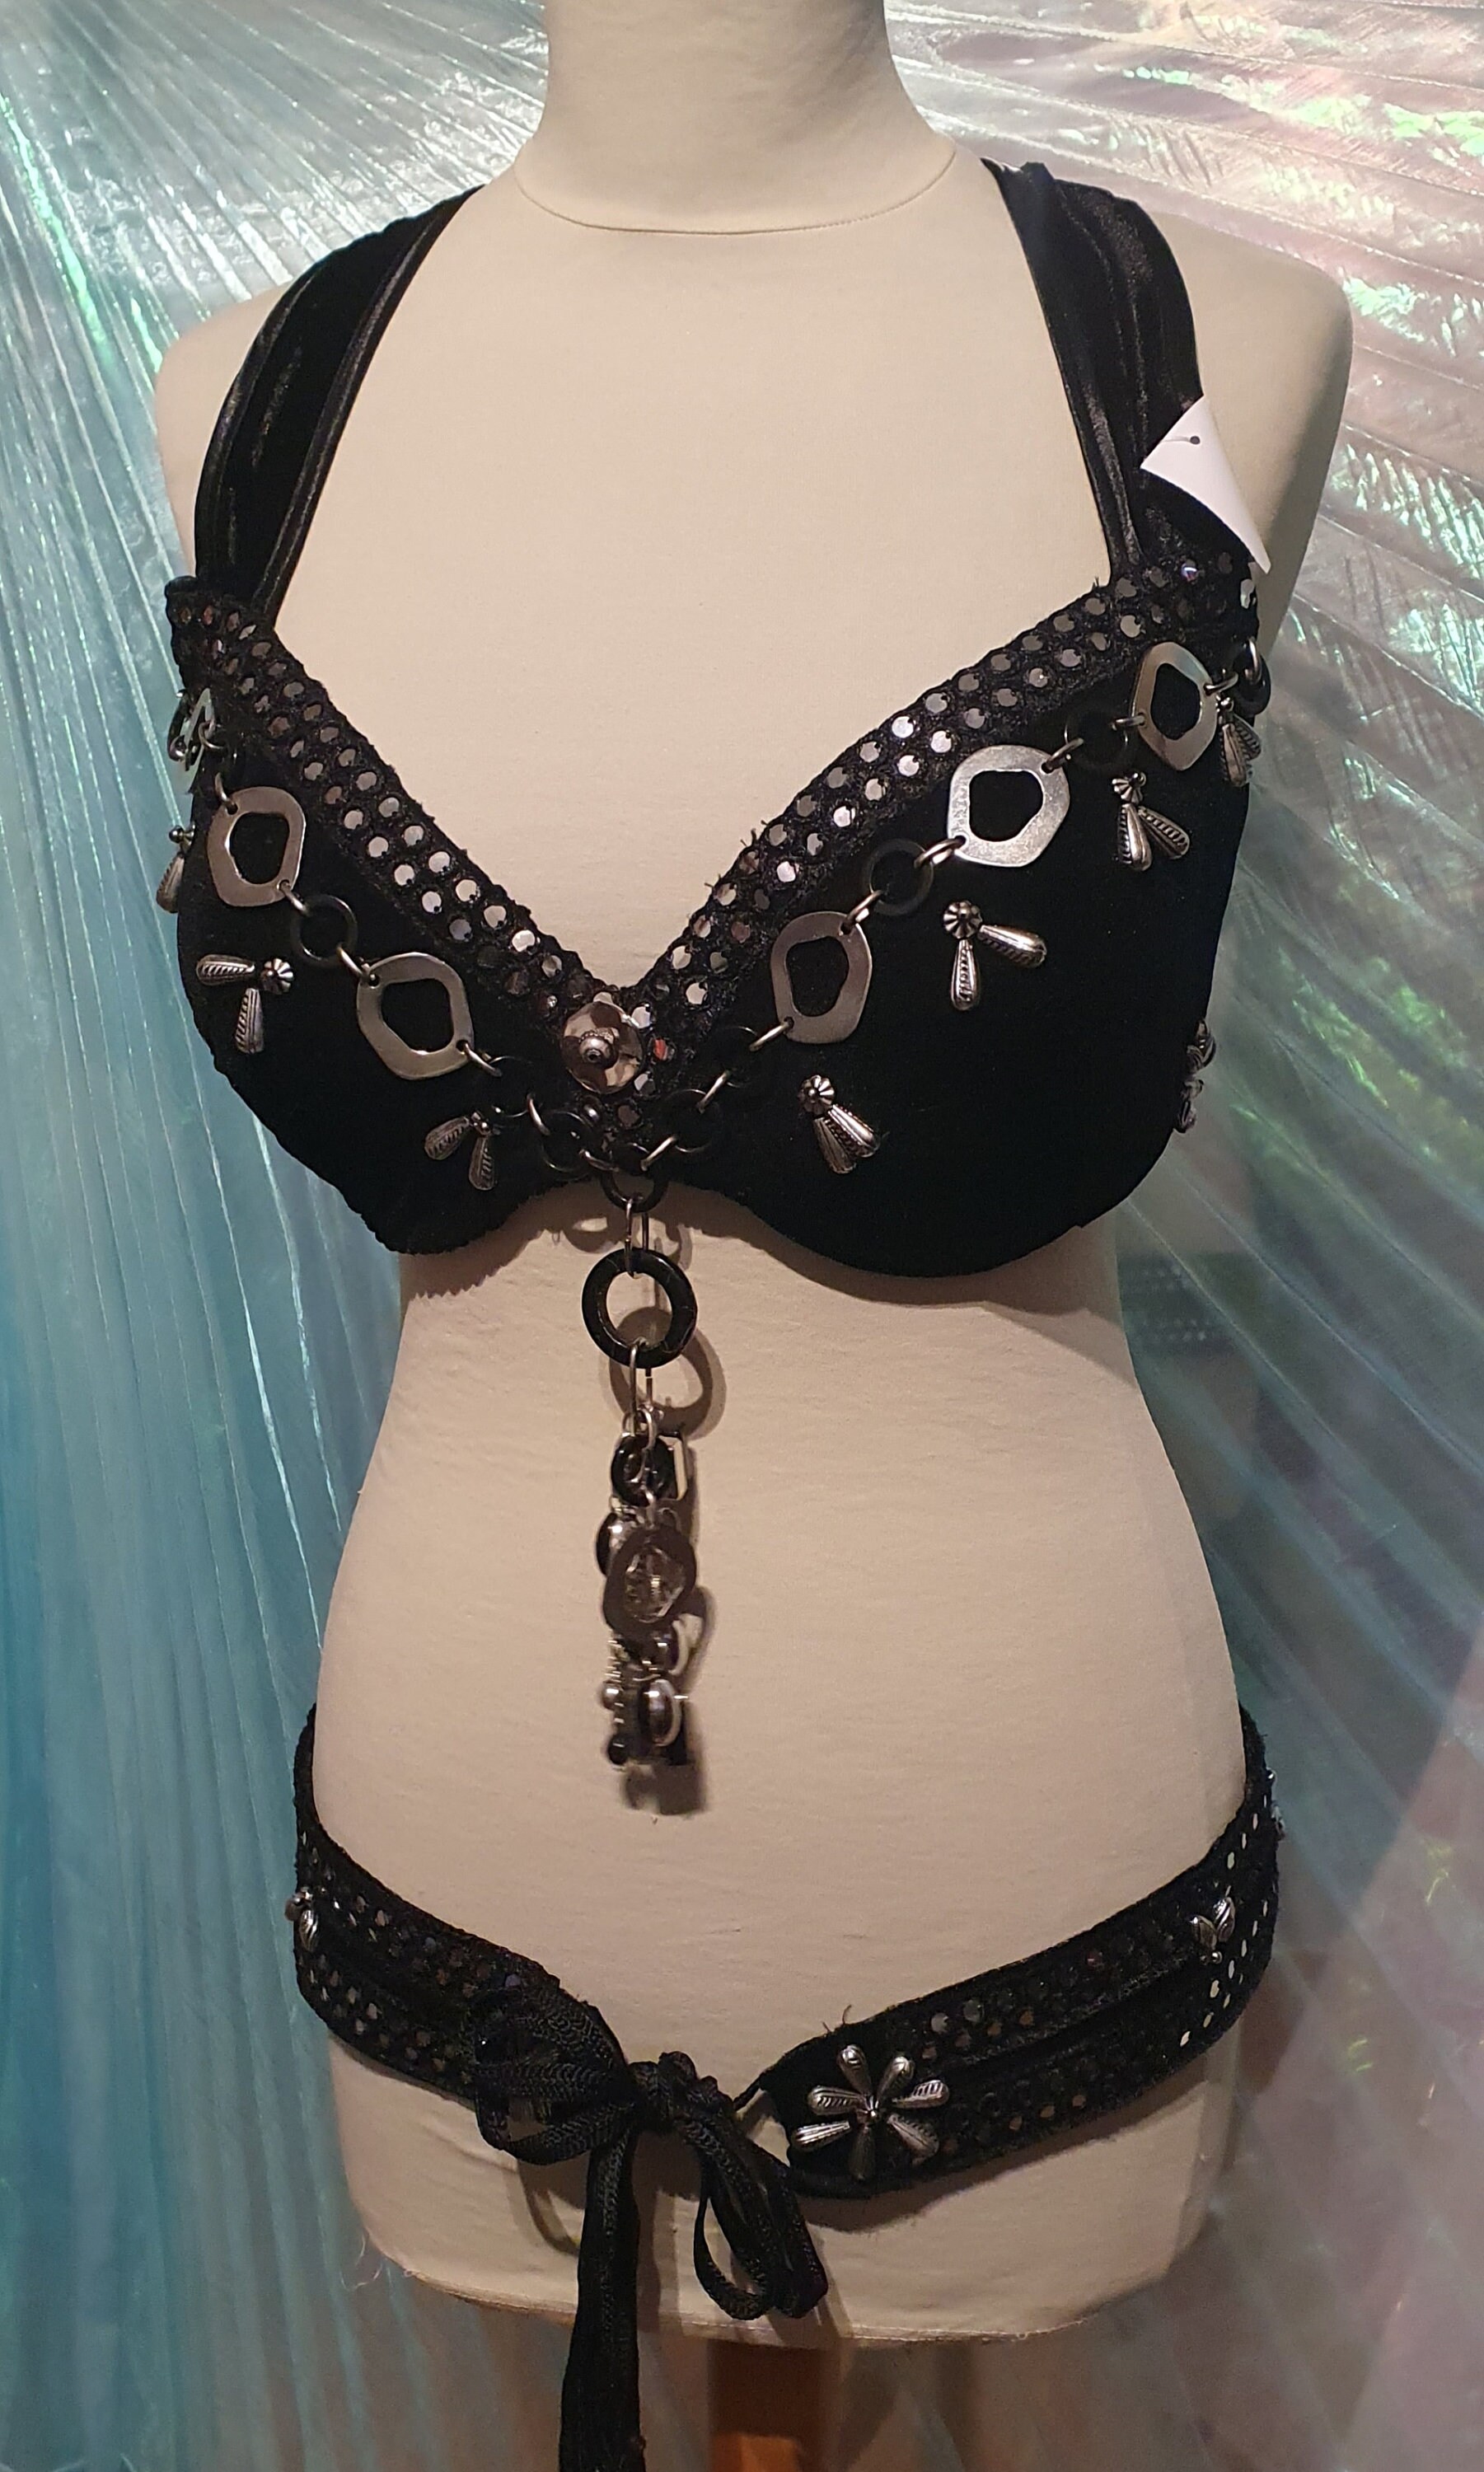 GOTHIC TRIBAL STEAMPUNK+ BELLYDANCE BRA WITH DRAPES 2012